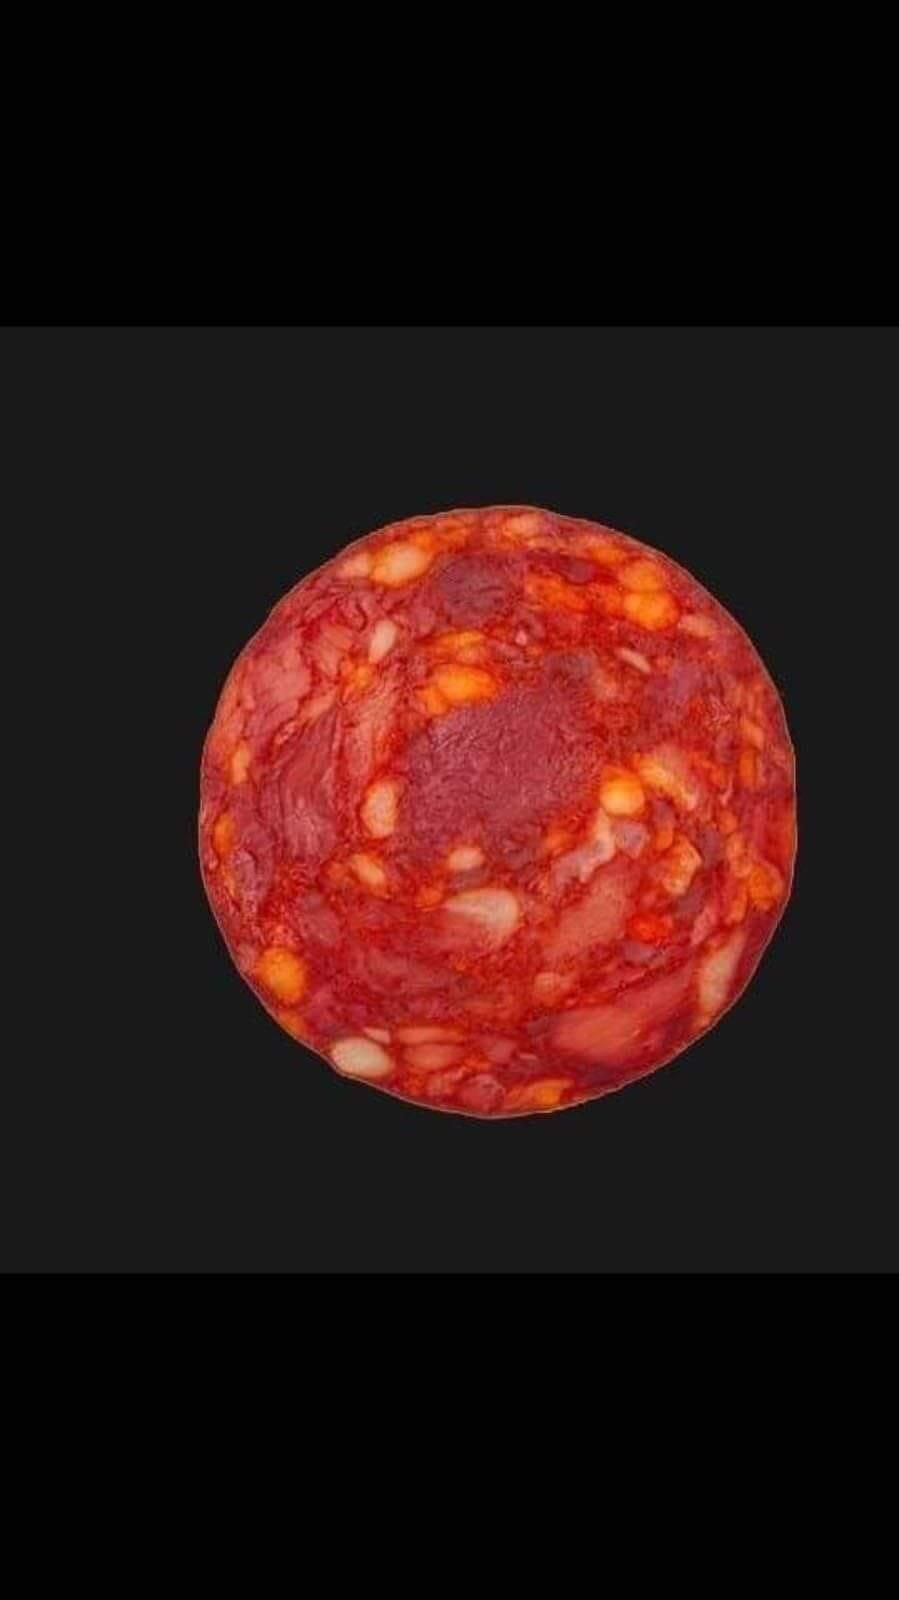 Took a fantastic photo of the blood moon tonight.